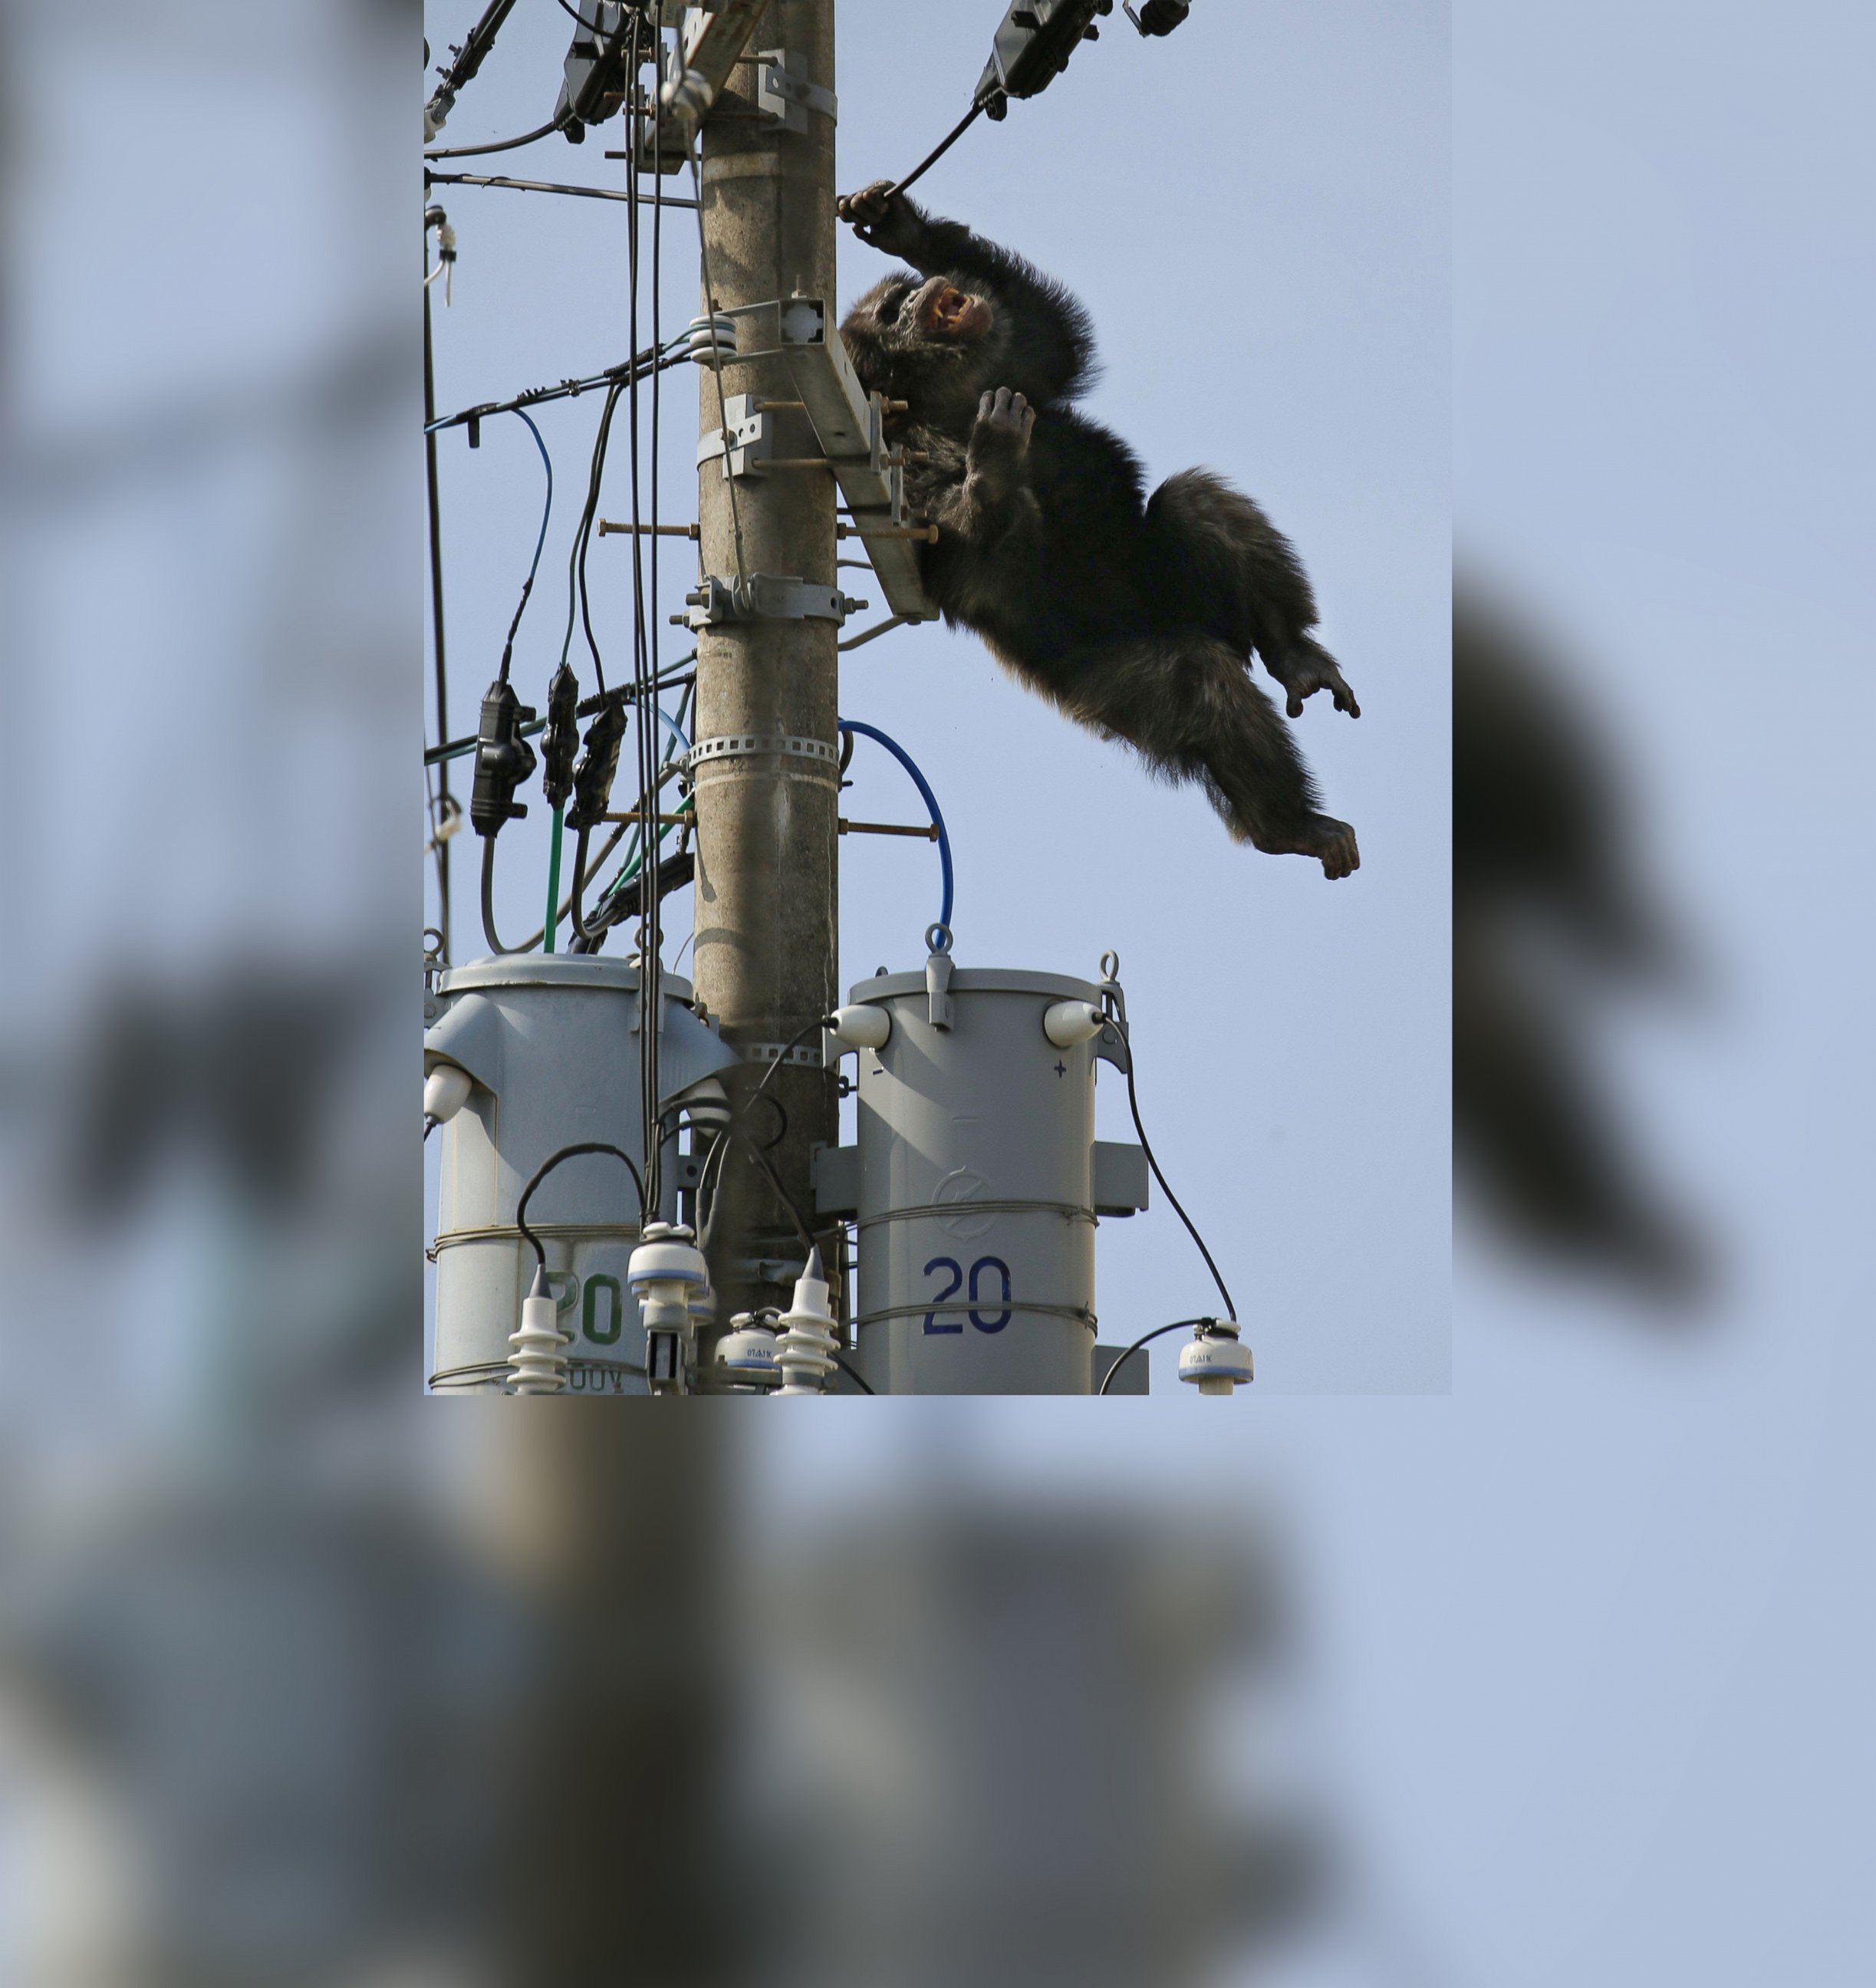 PHOTO: Chacha, the male chimp, falls off an electric pole, after being hit by a sedative arrow in Sendai, northern Japan, April 14, 2016.